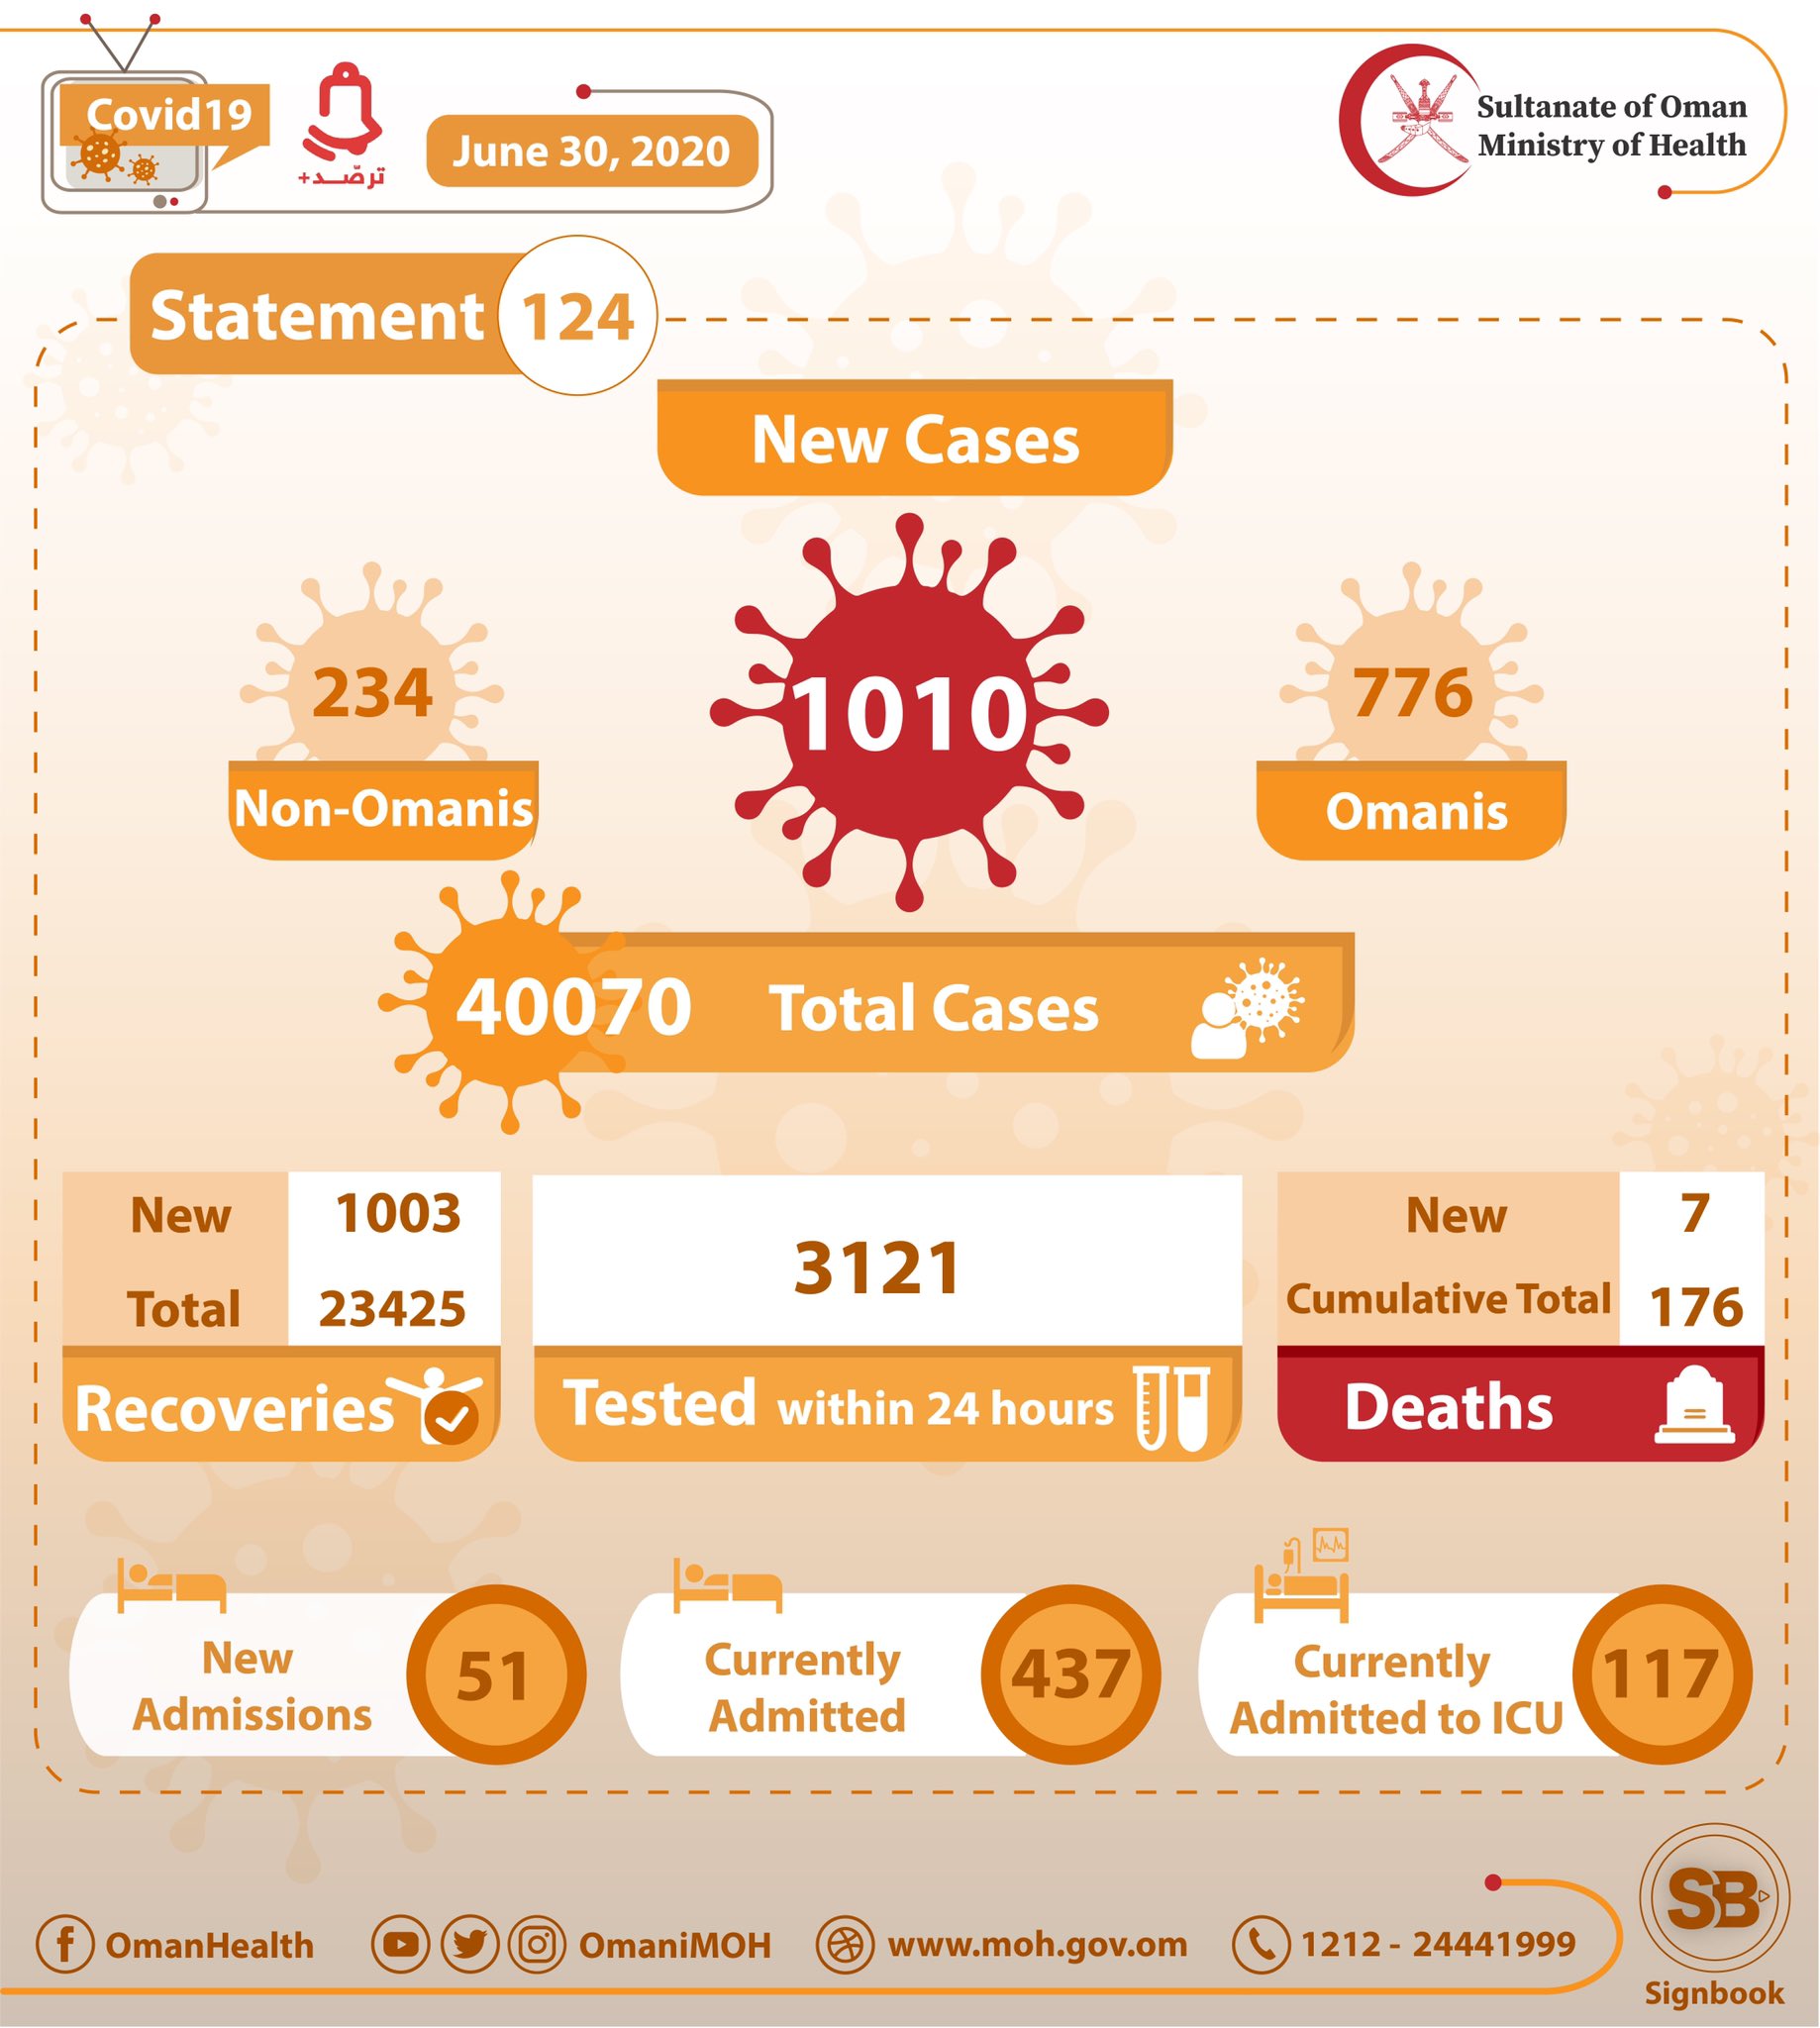 1010 New Cases Registered In Oman, Total Cases 40, 007